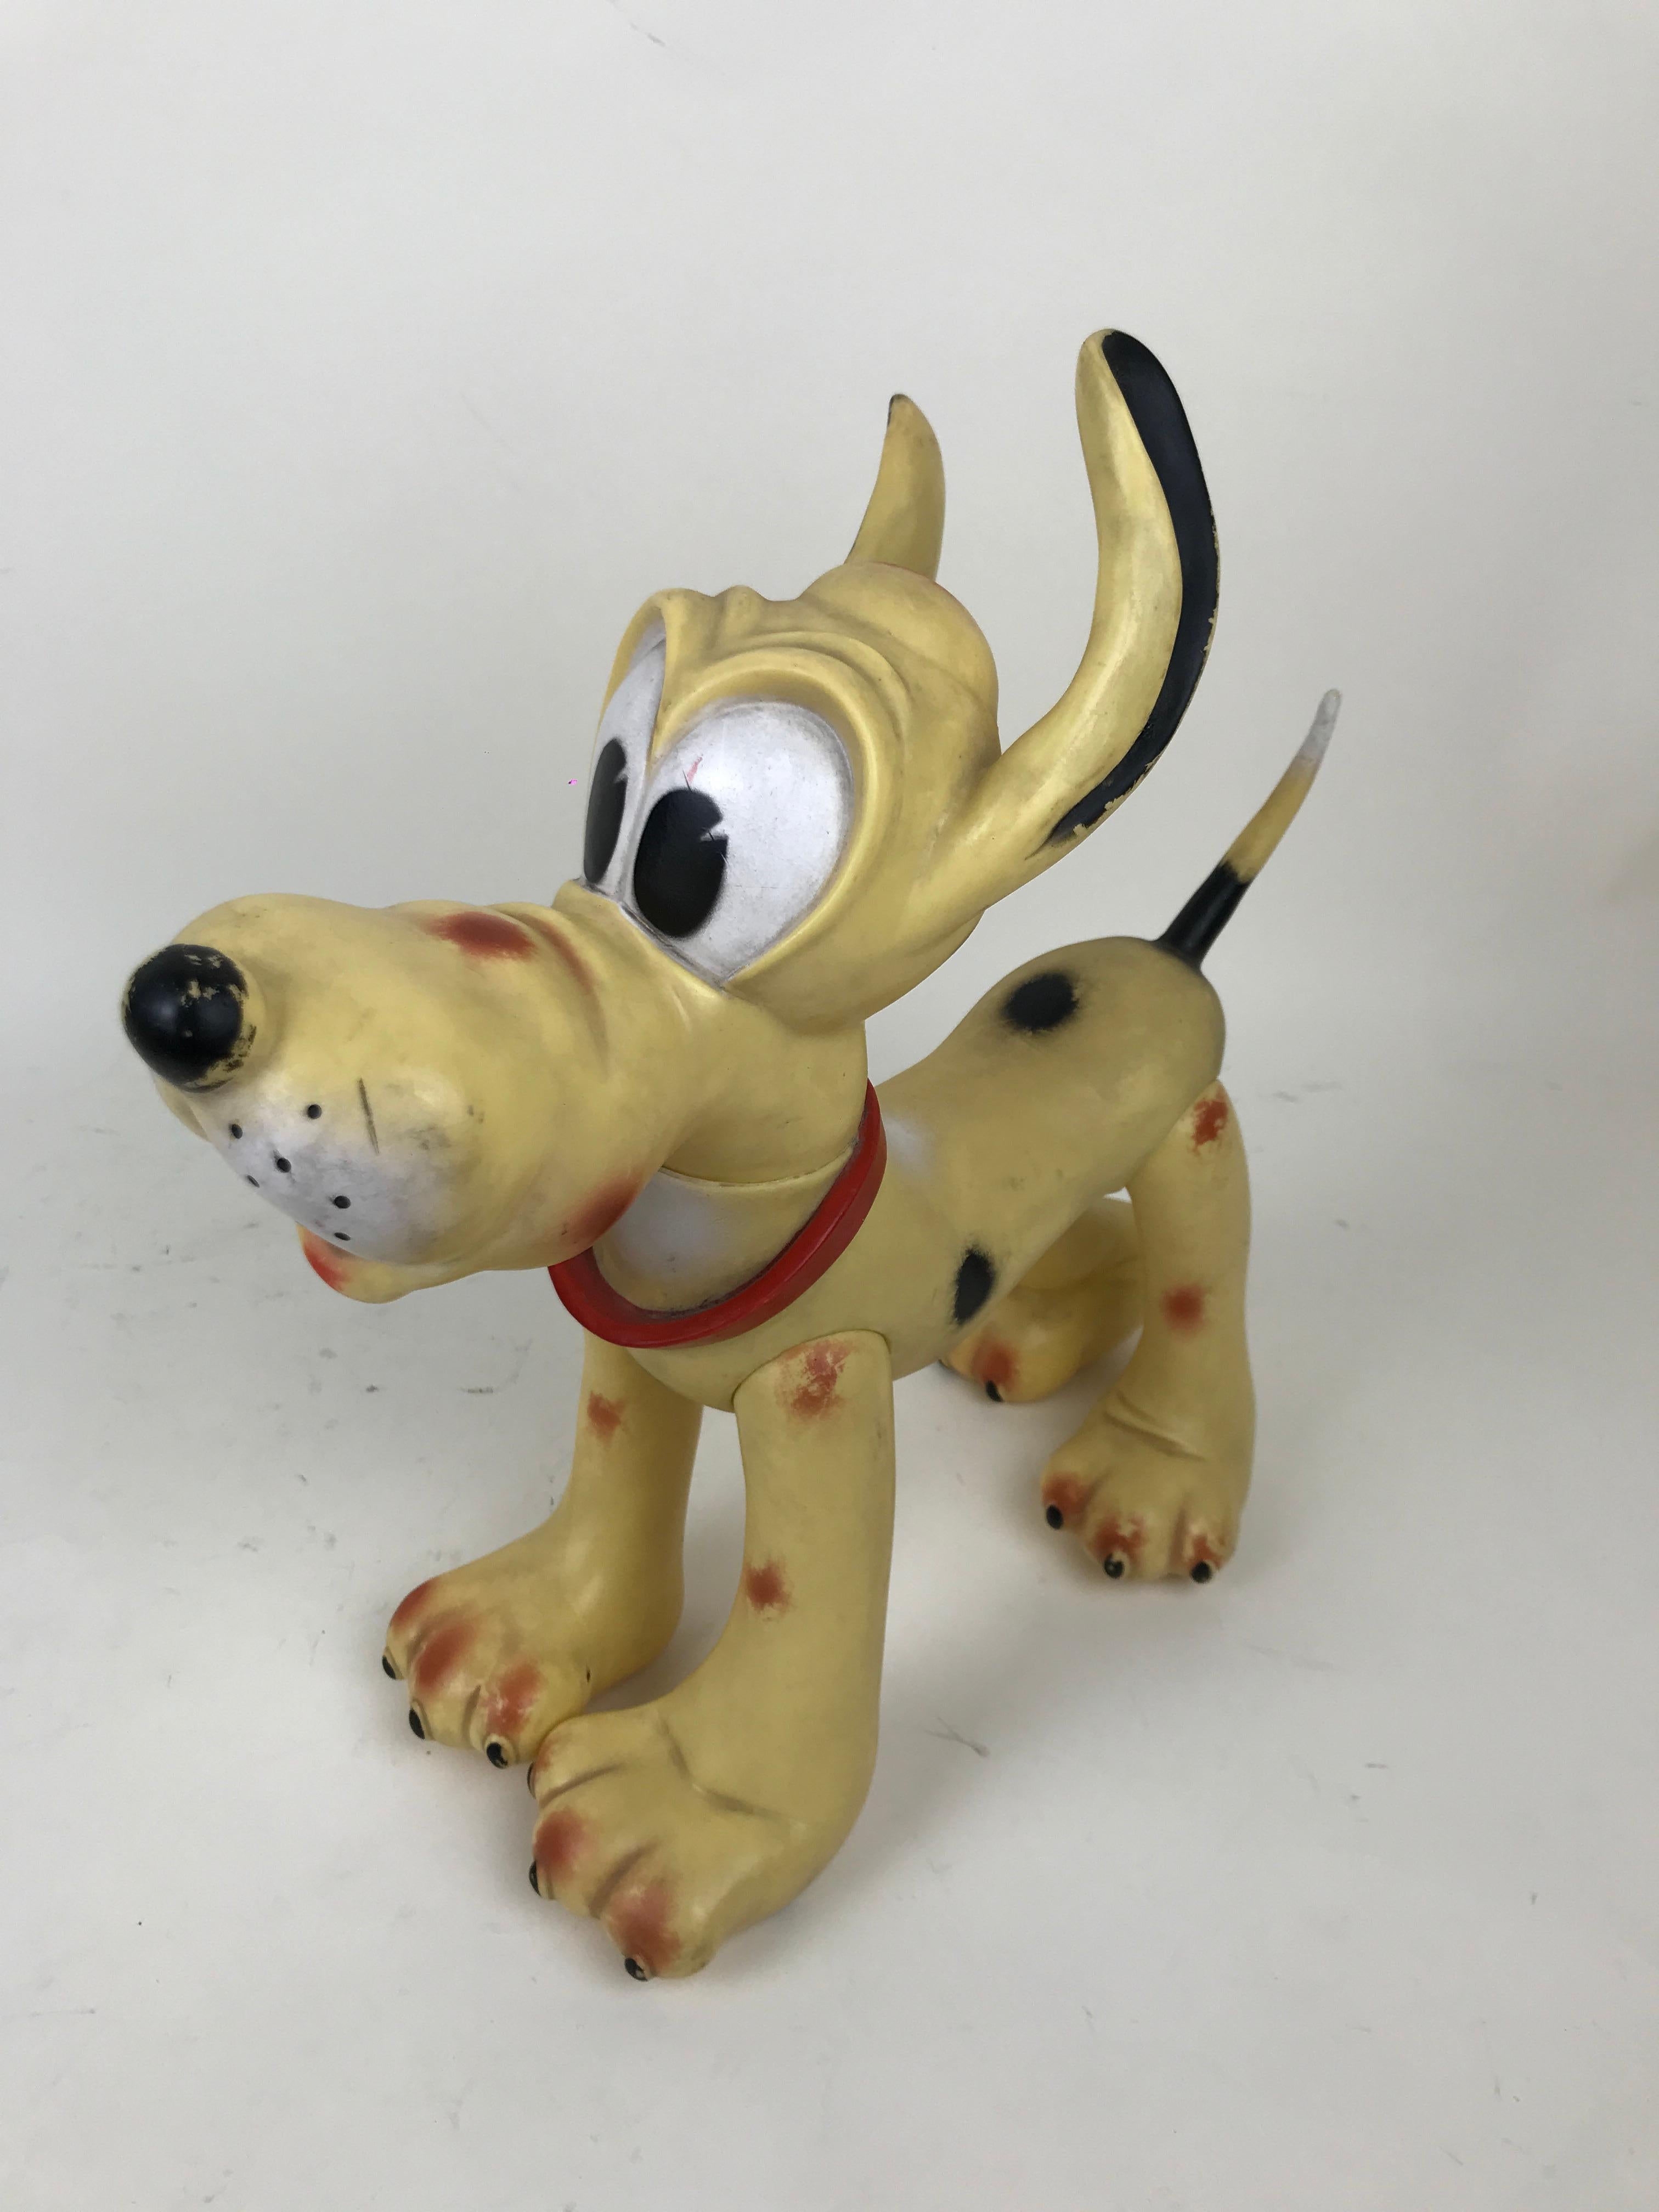 Vintage Pluto the pup squeak rubber toy made by Ledraplastic Italy in the 1960s.

All four legs and head are movable. 

Marked Walt Disney production on the back and stamped with Ledraplastic elephant symbol.

Collector's note:

In 1962, the